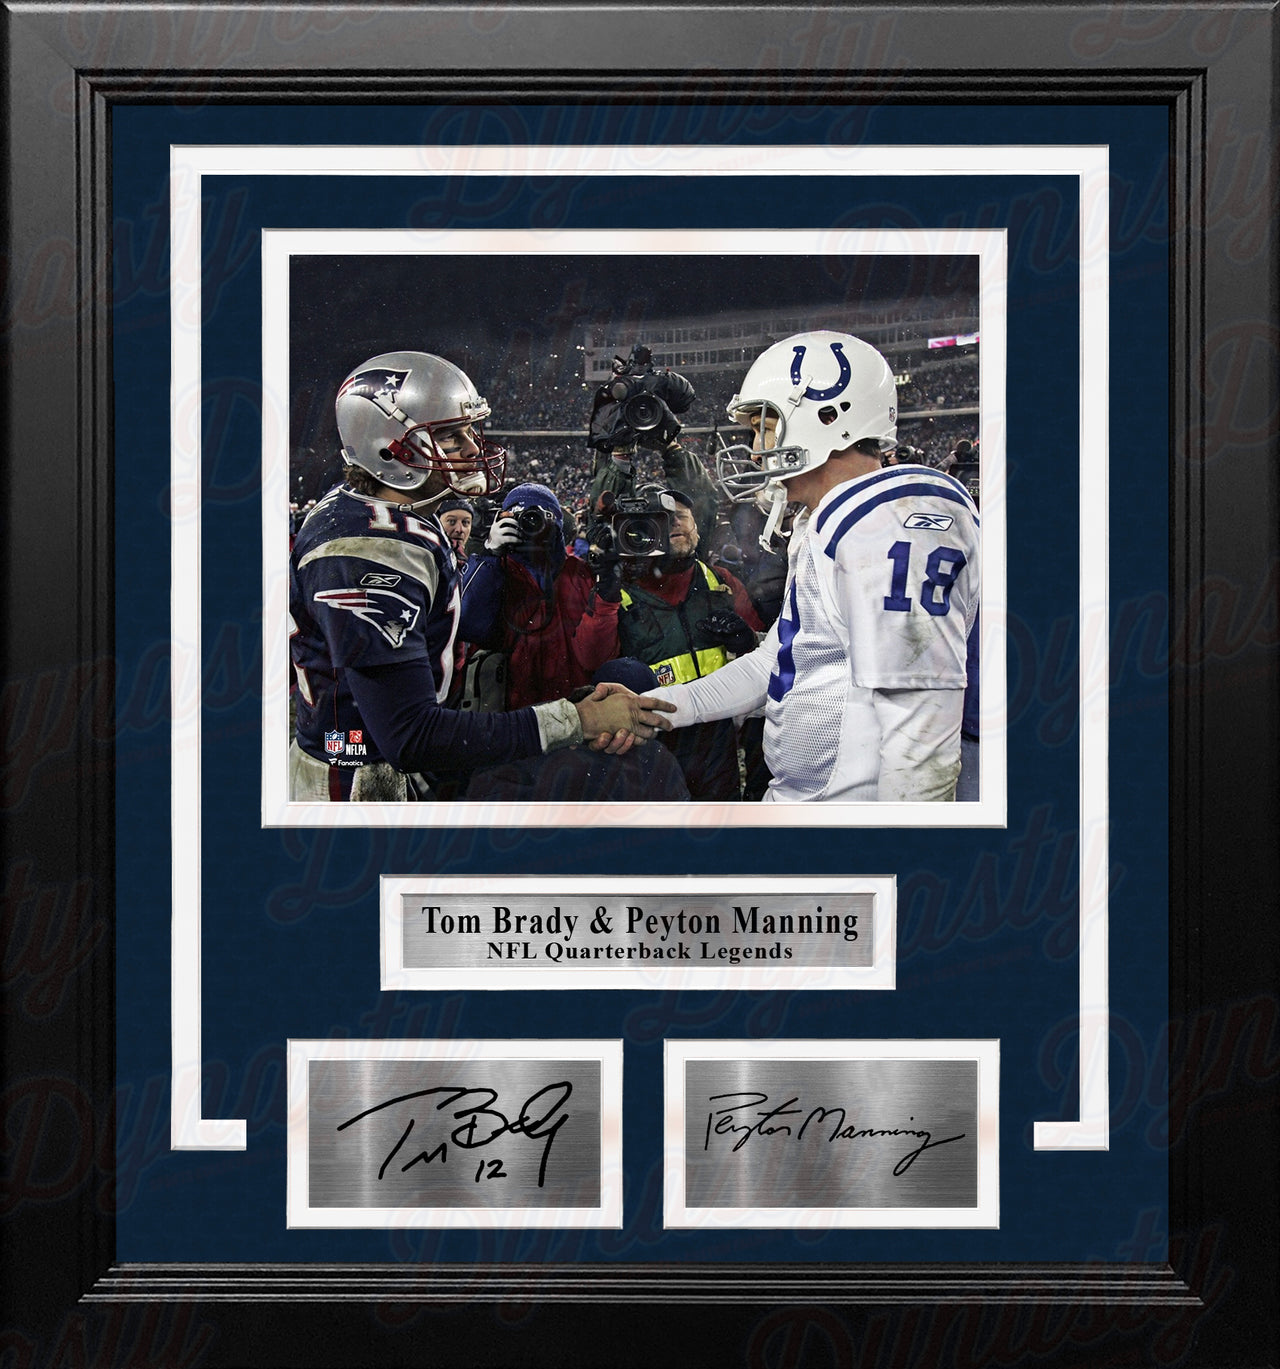 Tom Brady and Peyton Manning 8x10 Quarterback Legends Framed Football Photo with Engraved Autographs - Dynasty Sports & Framing 